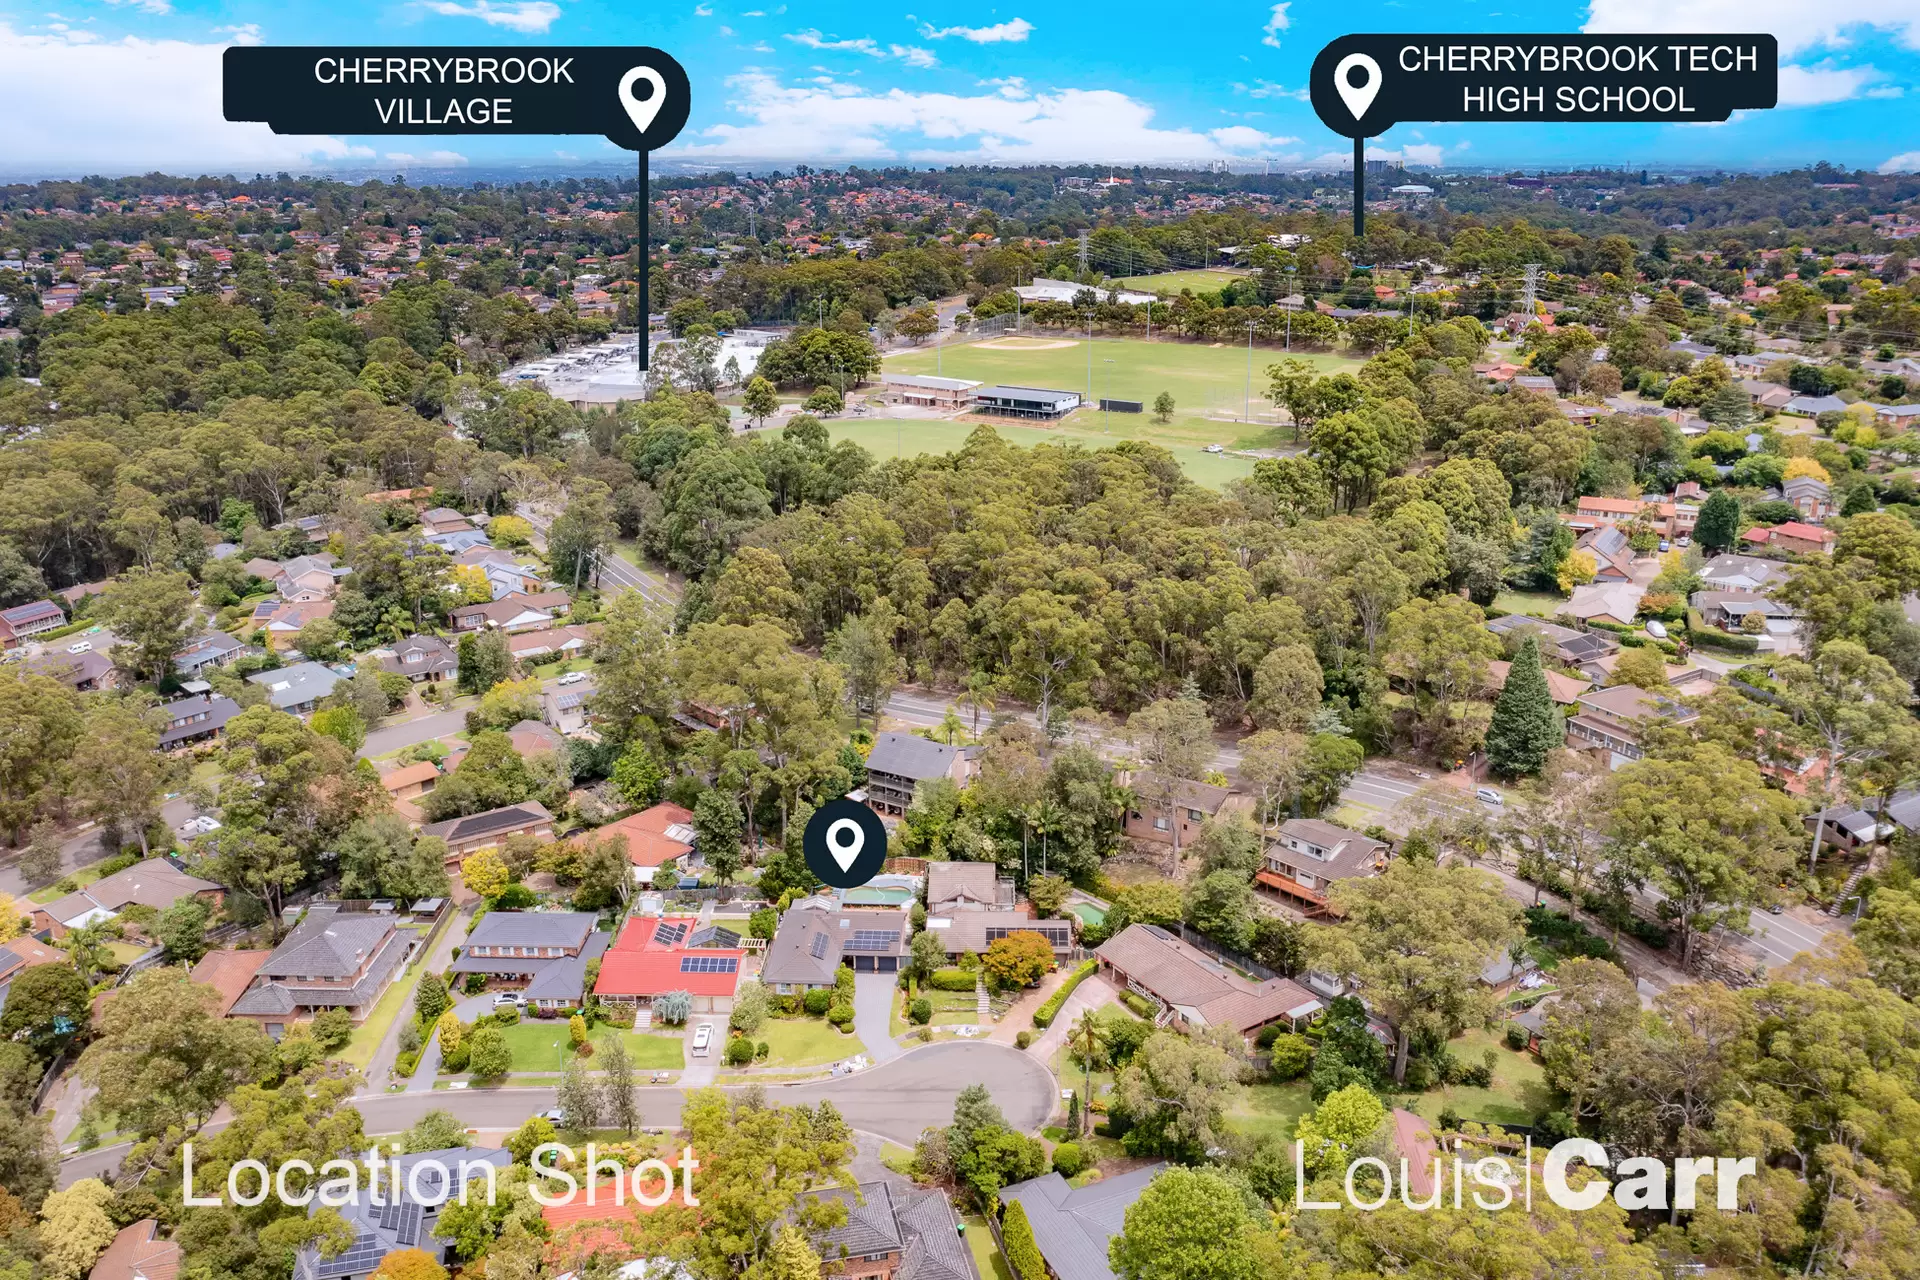 Photo #17: 17 Copperleaf Place, Cherrybrook - For Sale by Louis Carr Real Estate